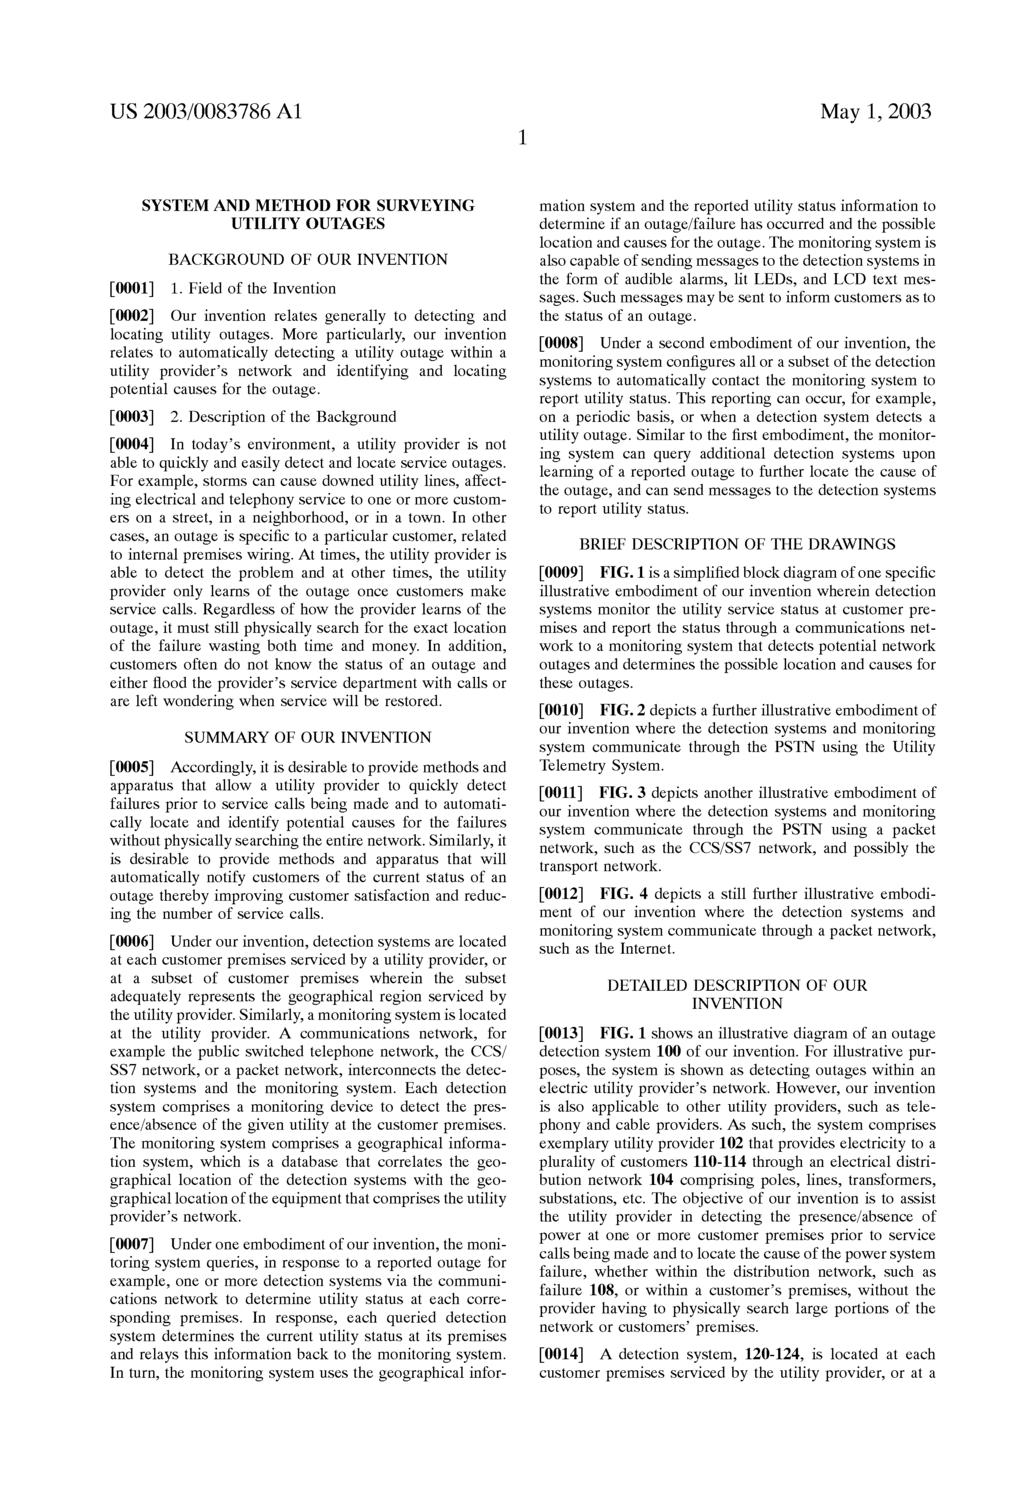 US 2003/0O83786 A1 May 1, 2003 SYSTEMAND METHOD FOR SURVEYING UTILITY OUTAGES BACKGROUND OF OUR INVENTION 0001) 1.